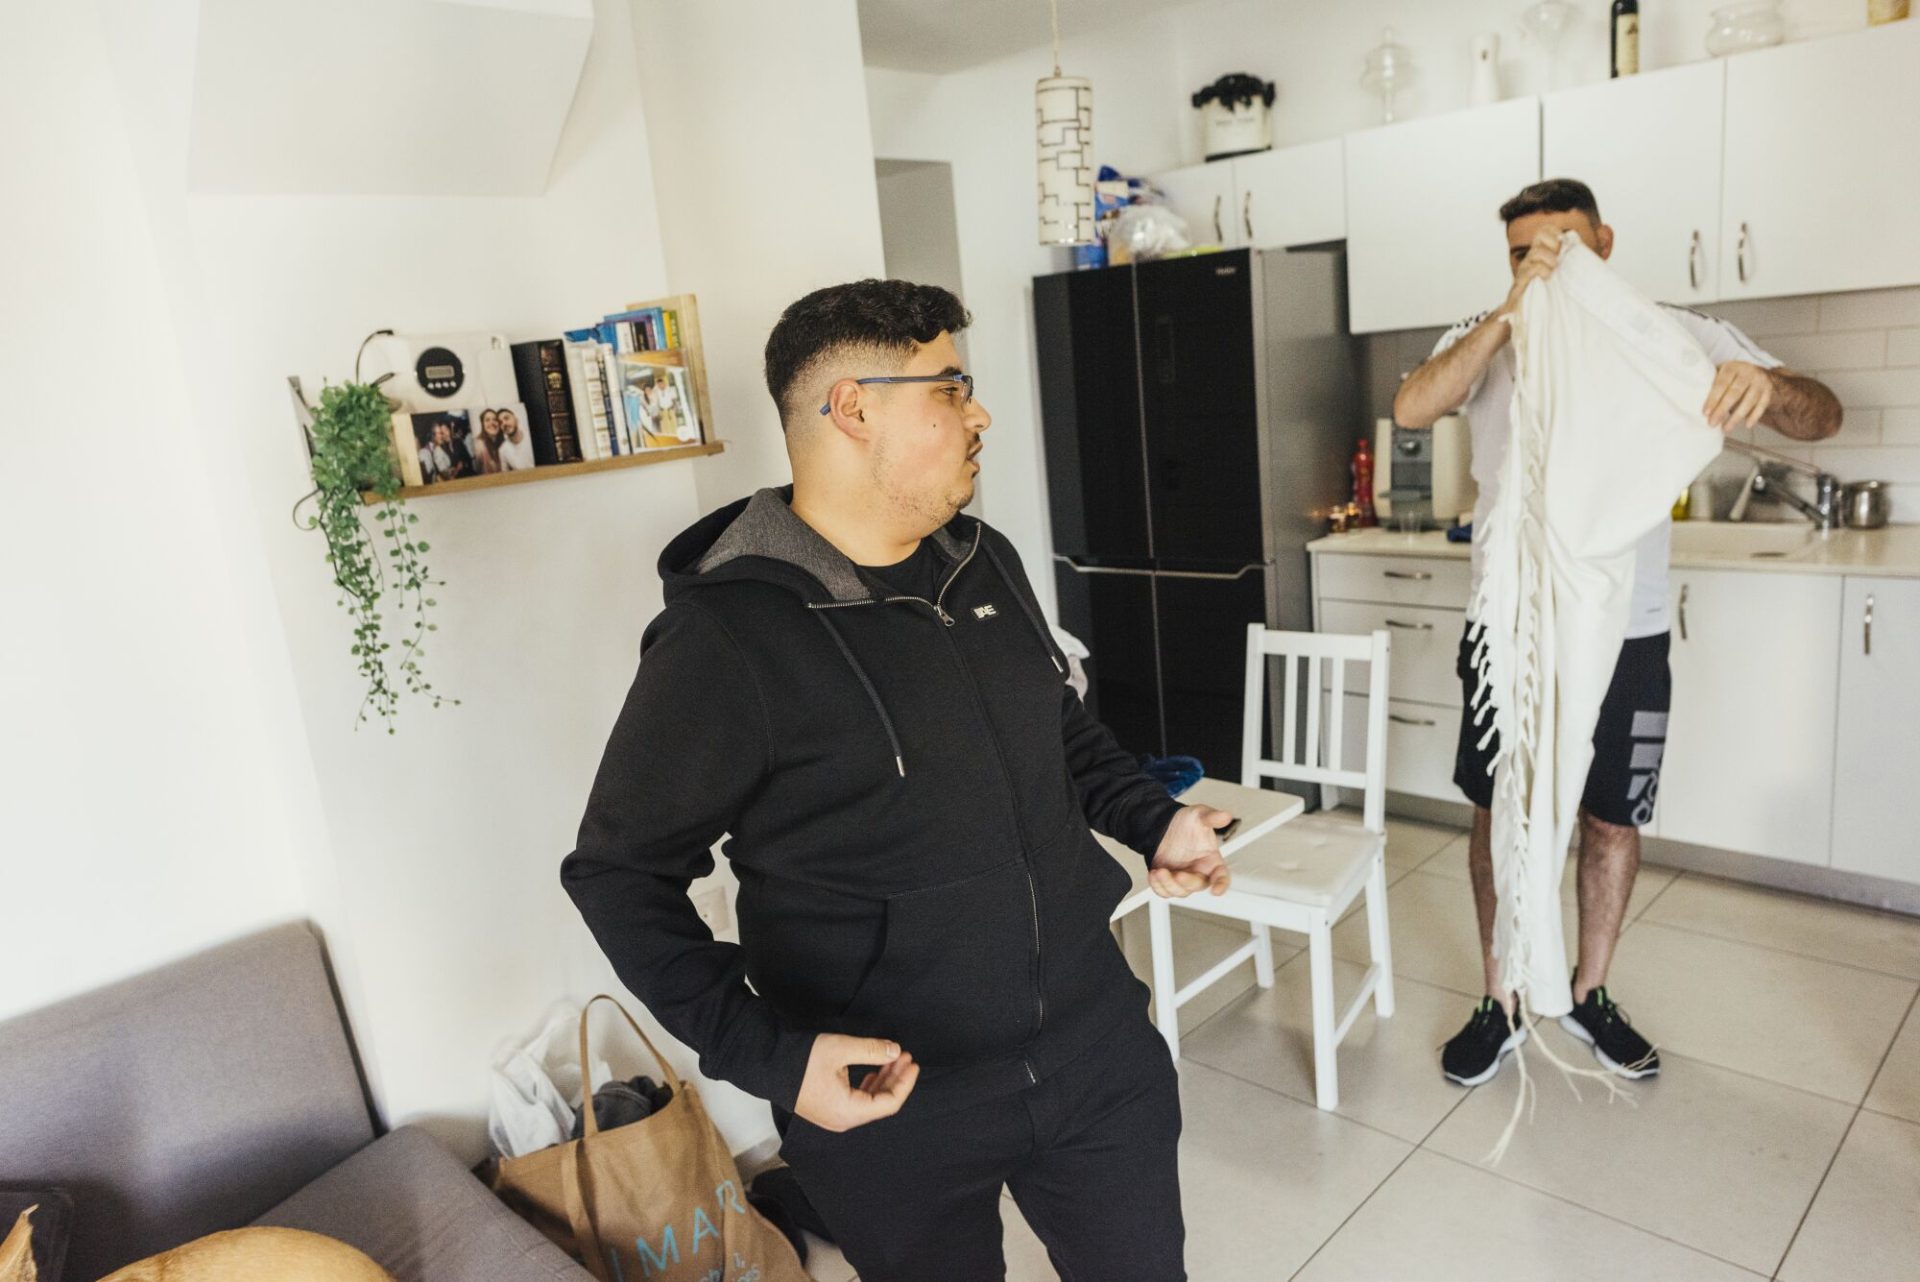 A man, left, in black clothing stands across from another man holding a shawl in an apartment 